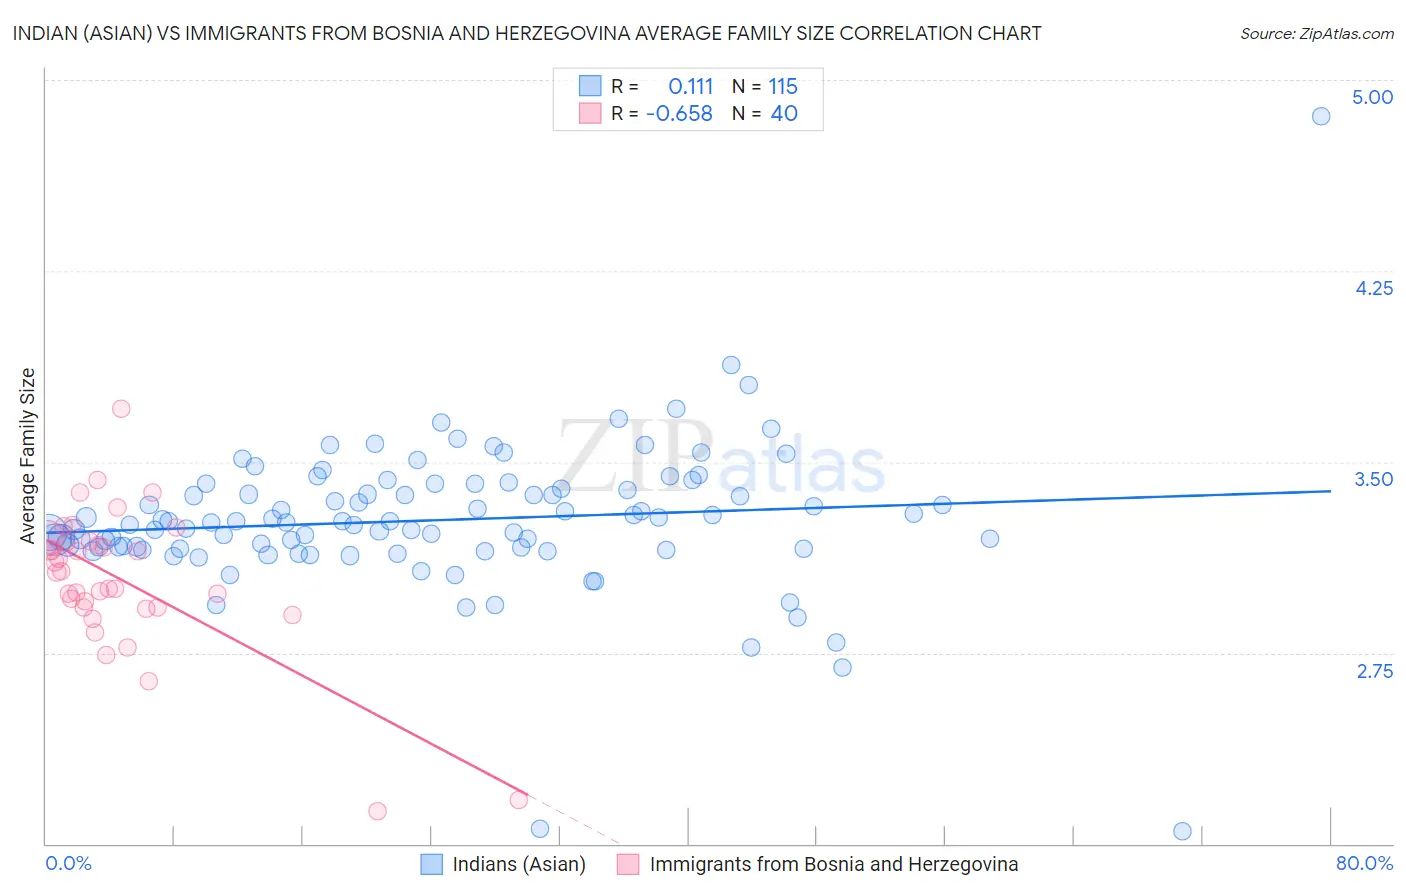 Indian (Asian) vs Immigrants from Bosnia and Herzegovina Average Family Size